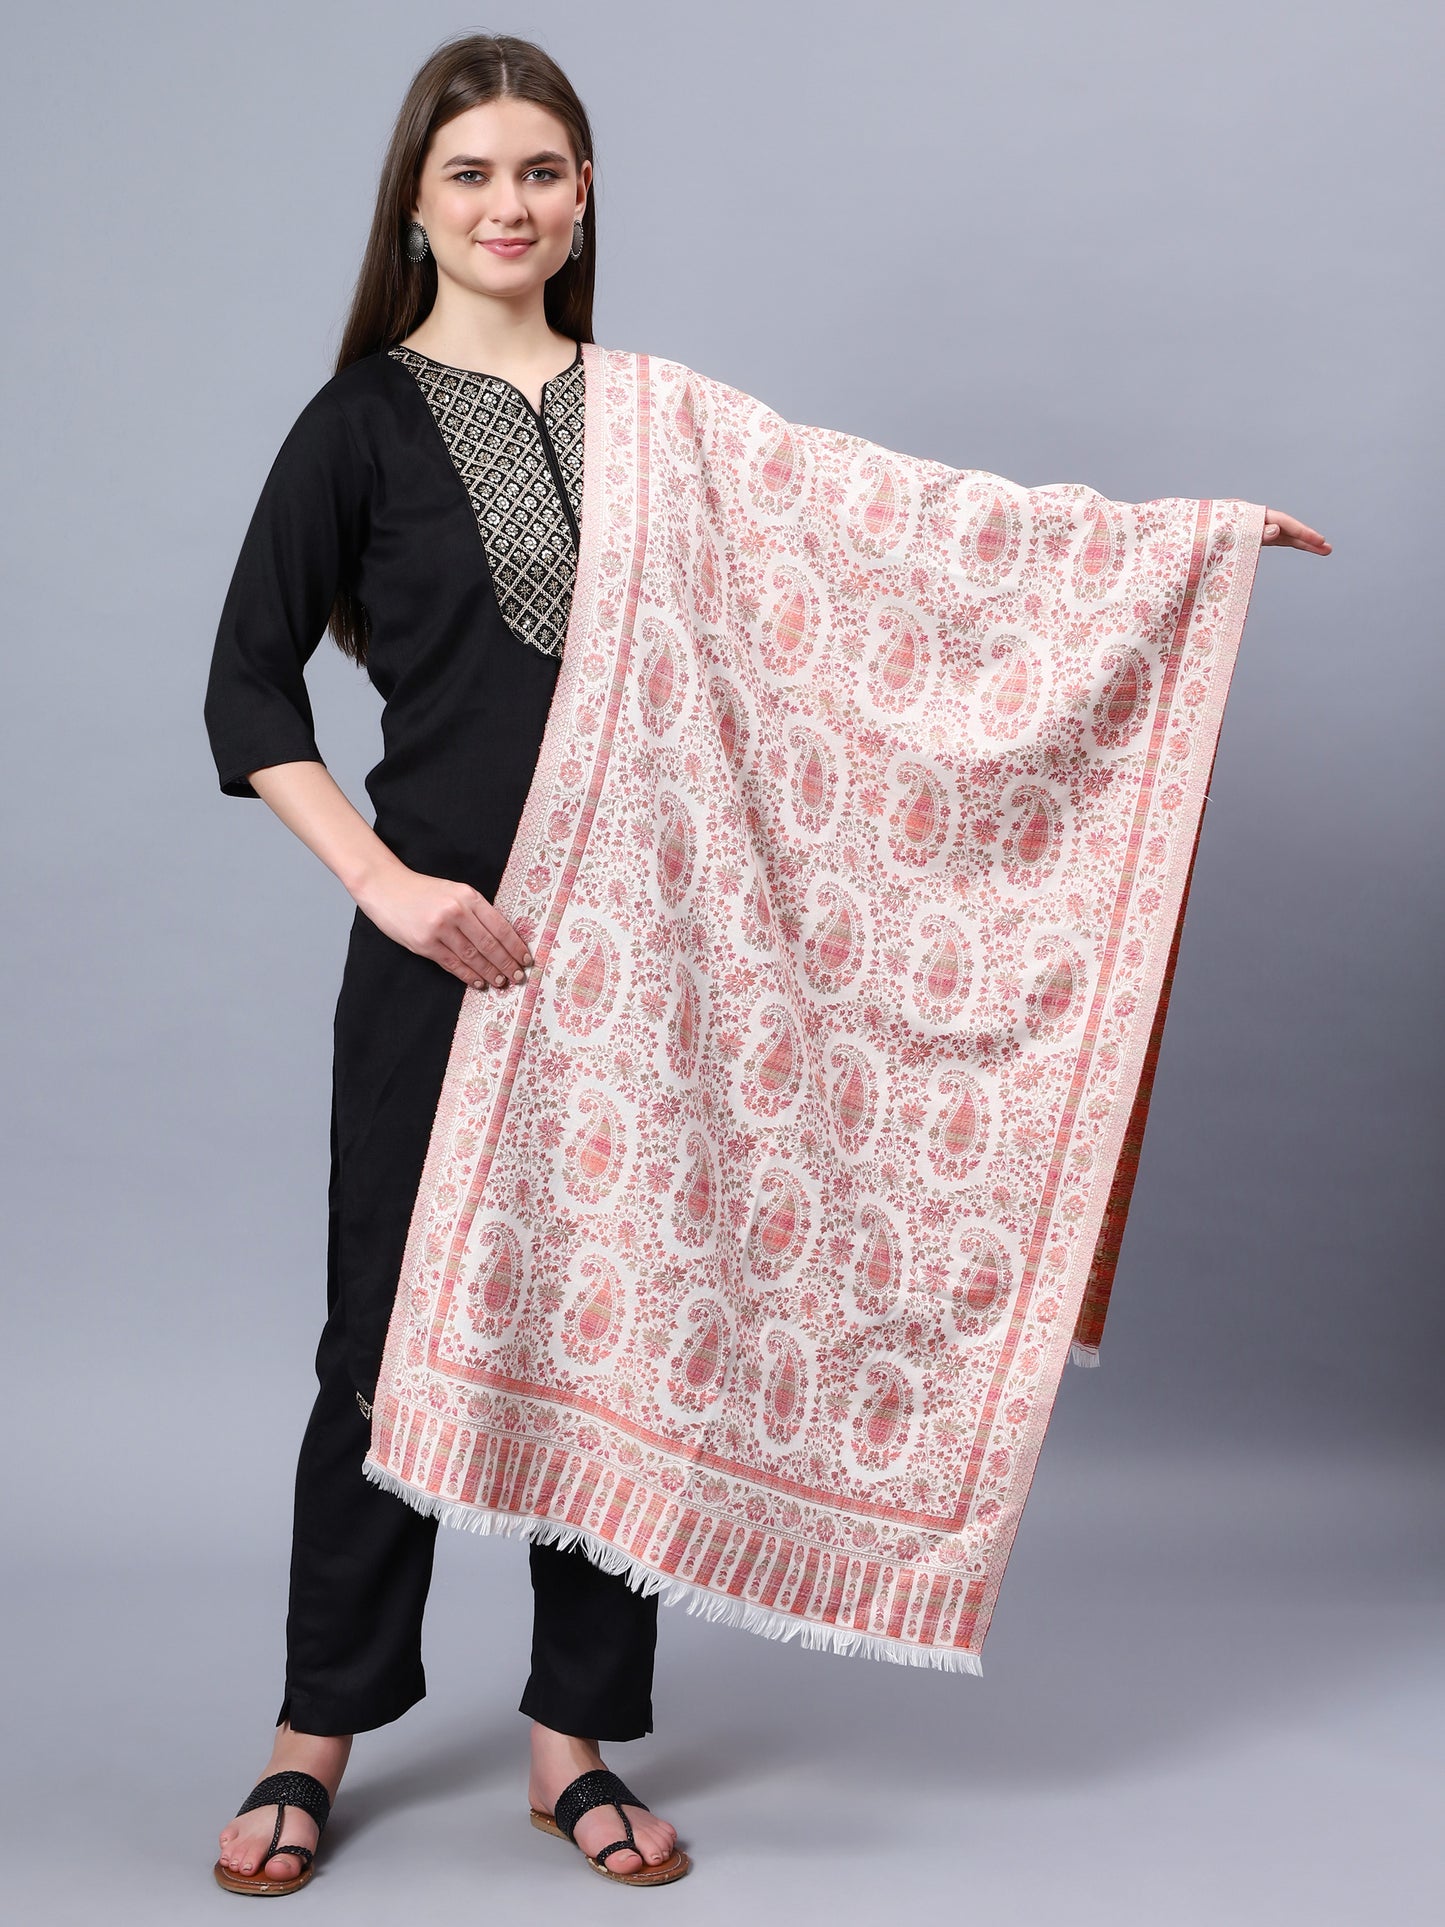 Off-white viscose stole with red paisley and floral jacquard pattern